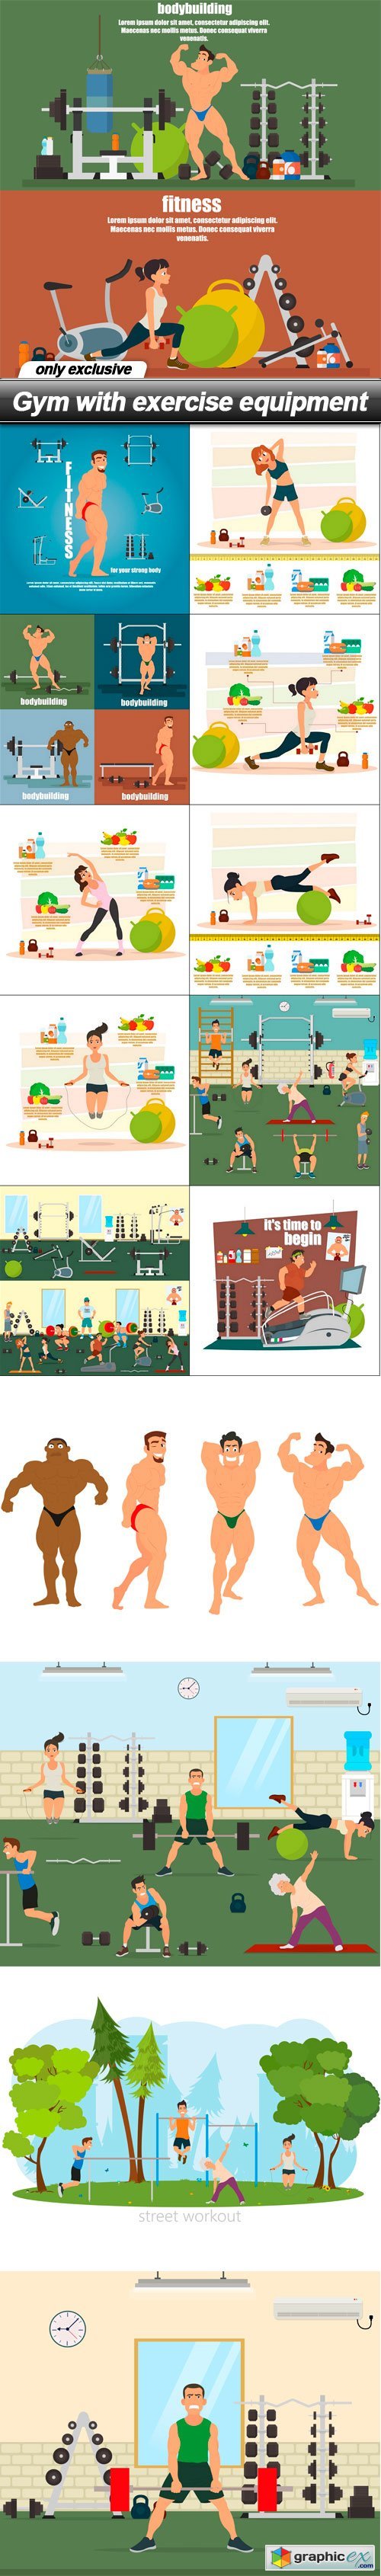 Gym with exercise equipment - 15 EPS